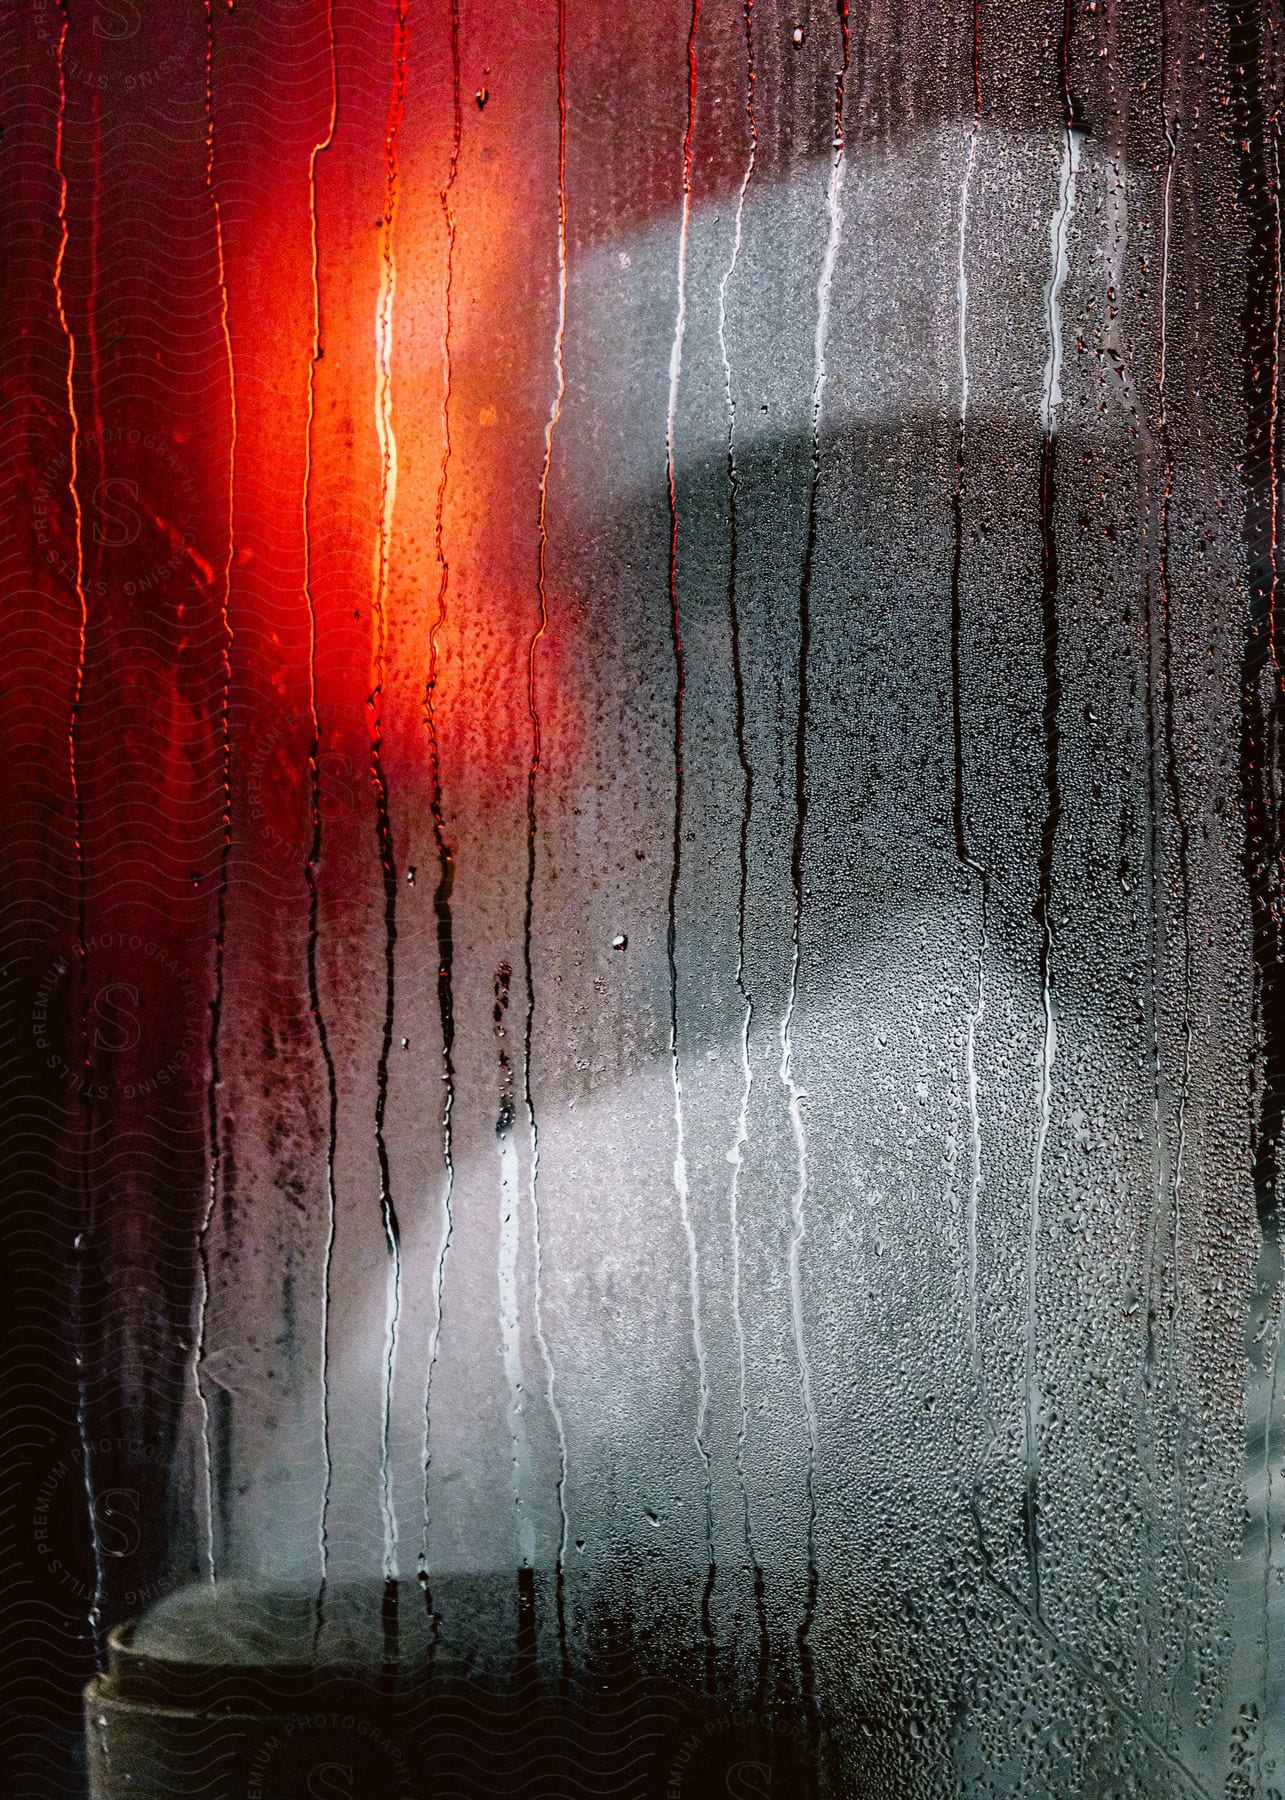 Water streaks down a moisture covered window as a woman stands inside